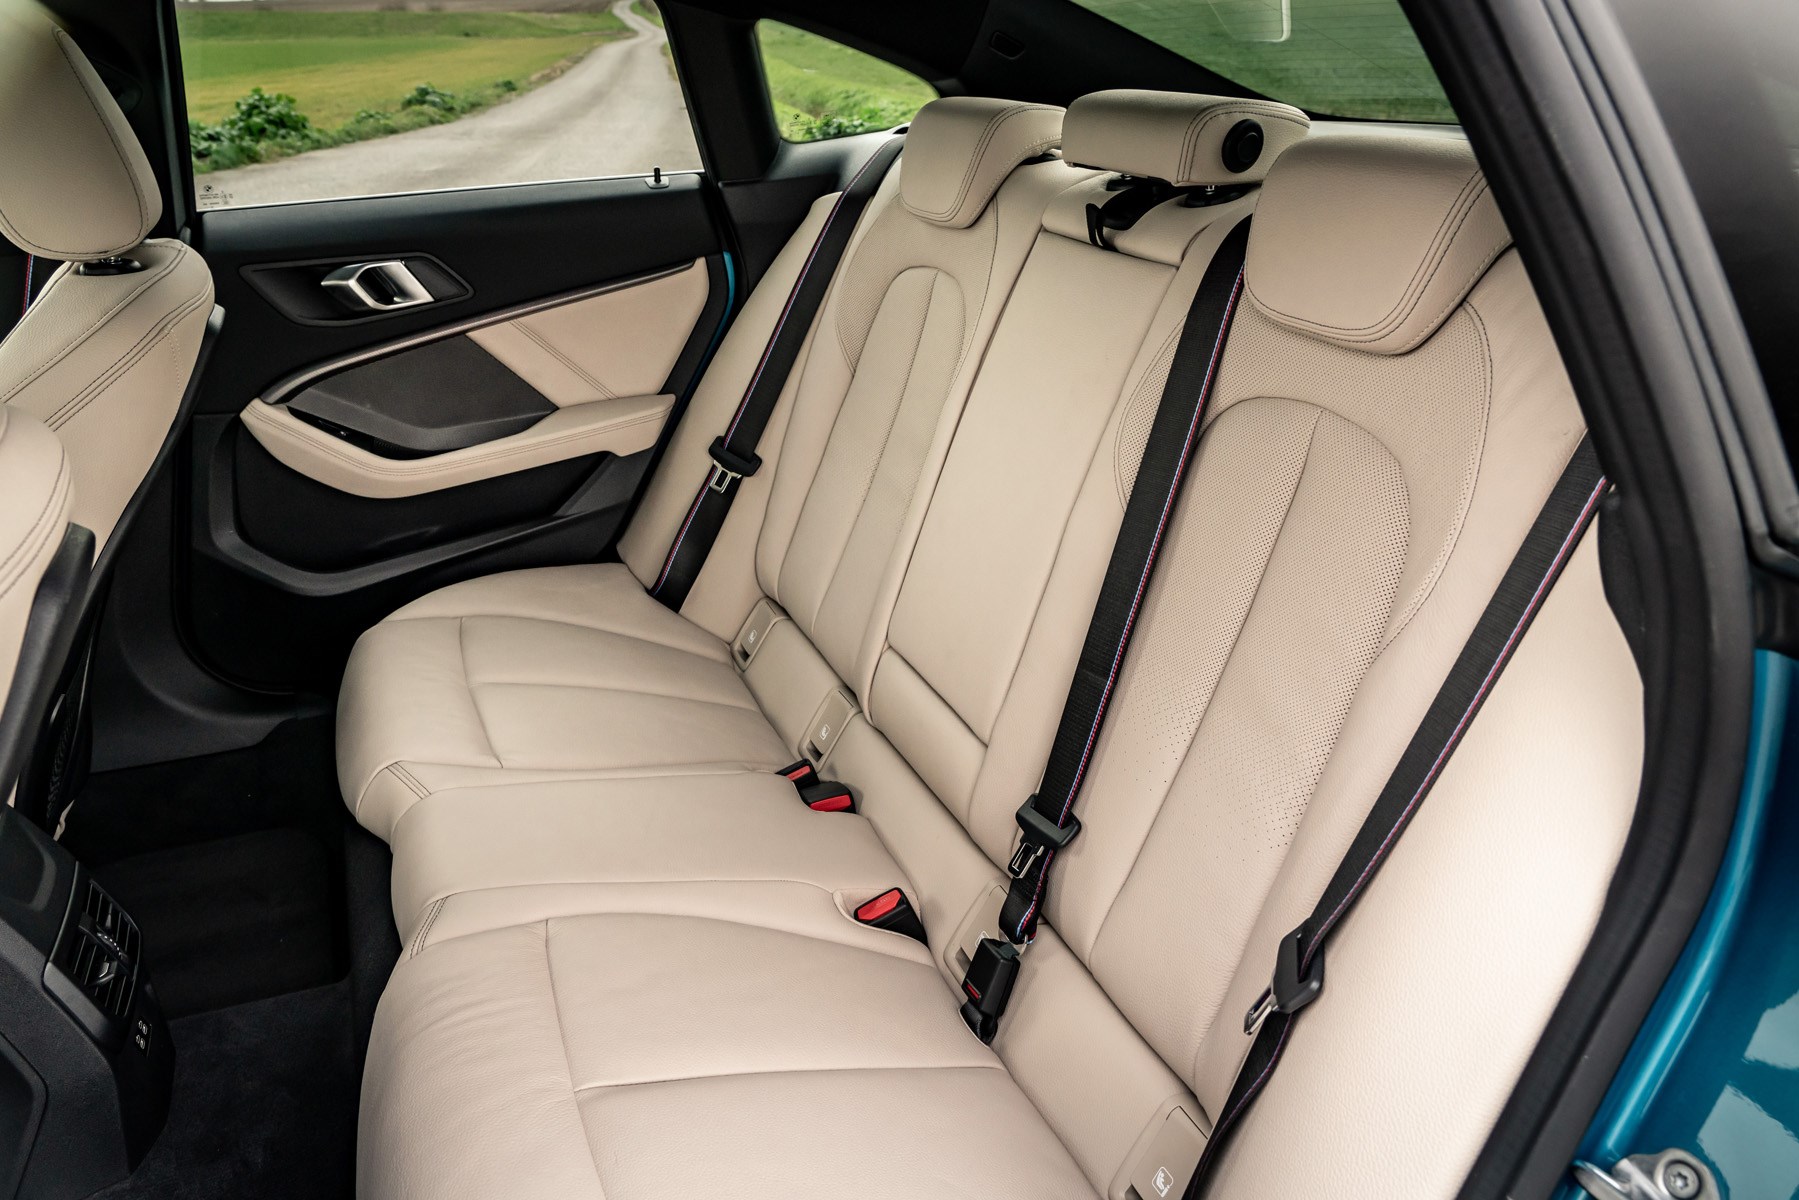 BMW 2-series Gran Coupe rear seats: quite tight on space